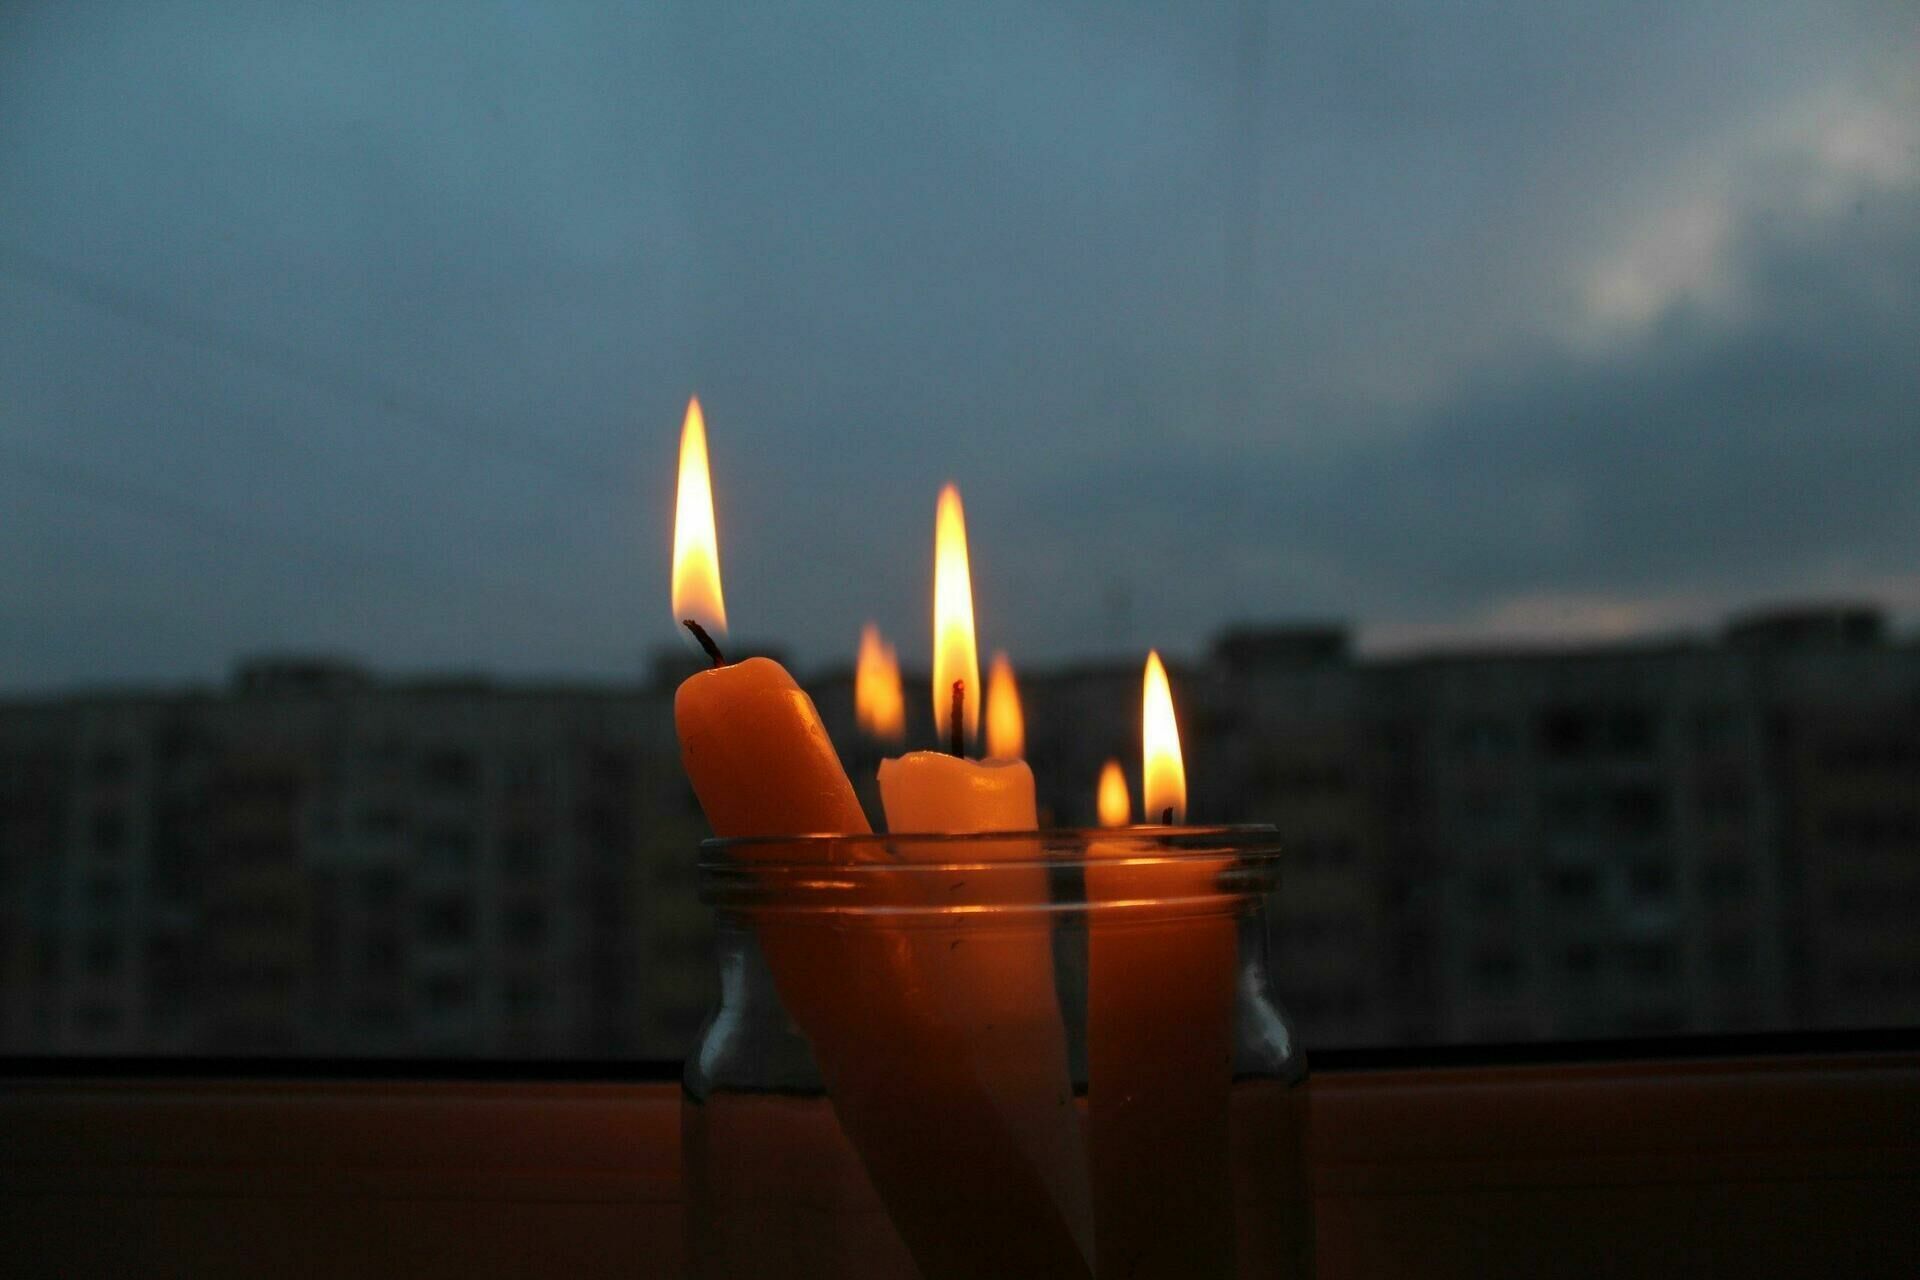 Yekaterinburg is left without electric light